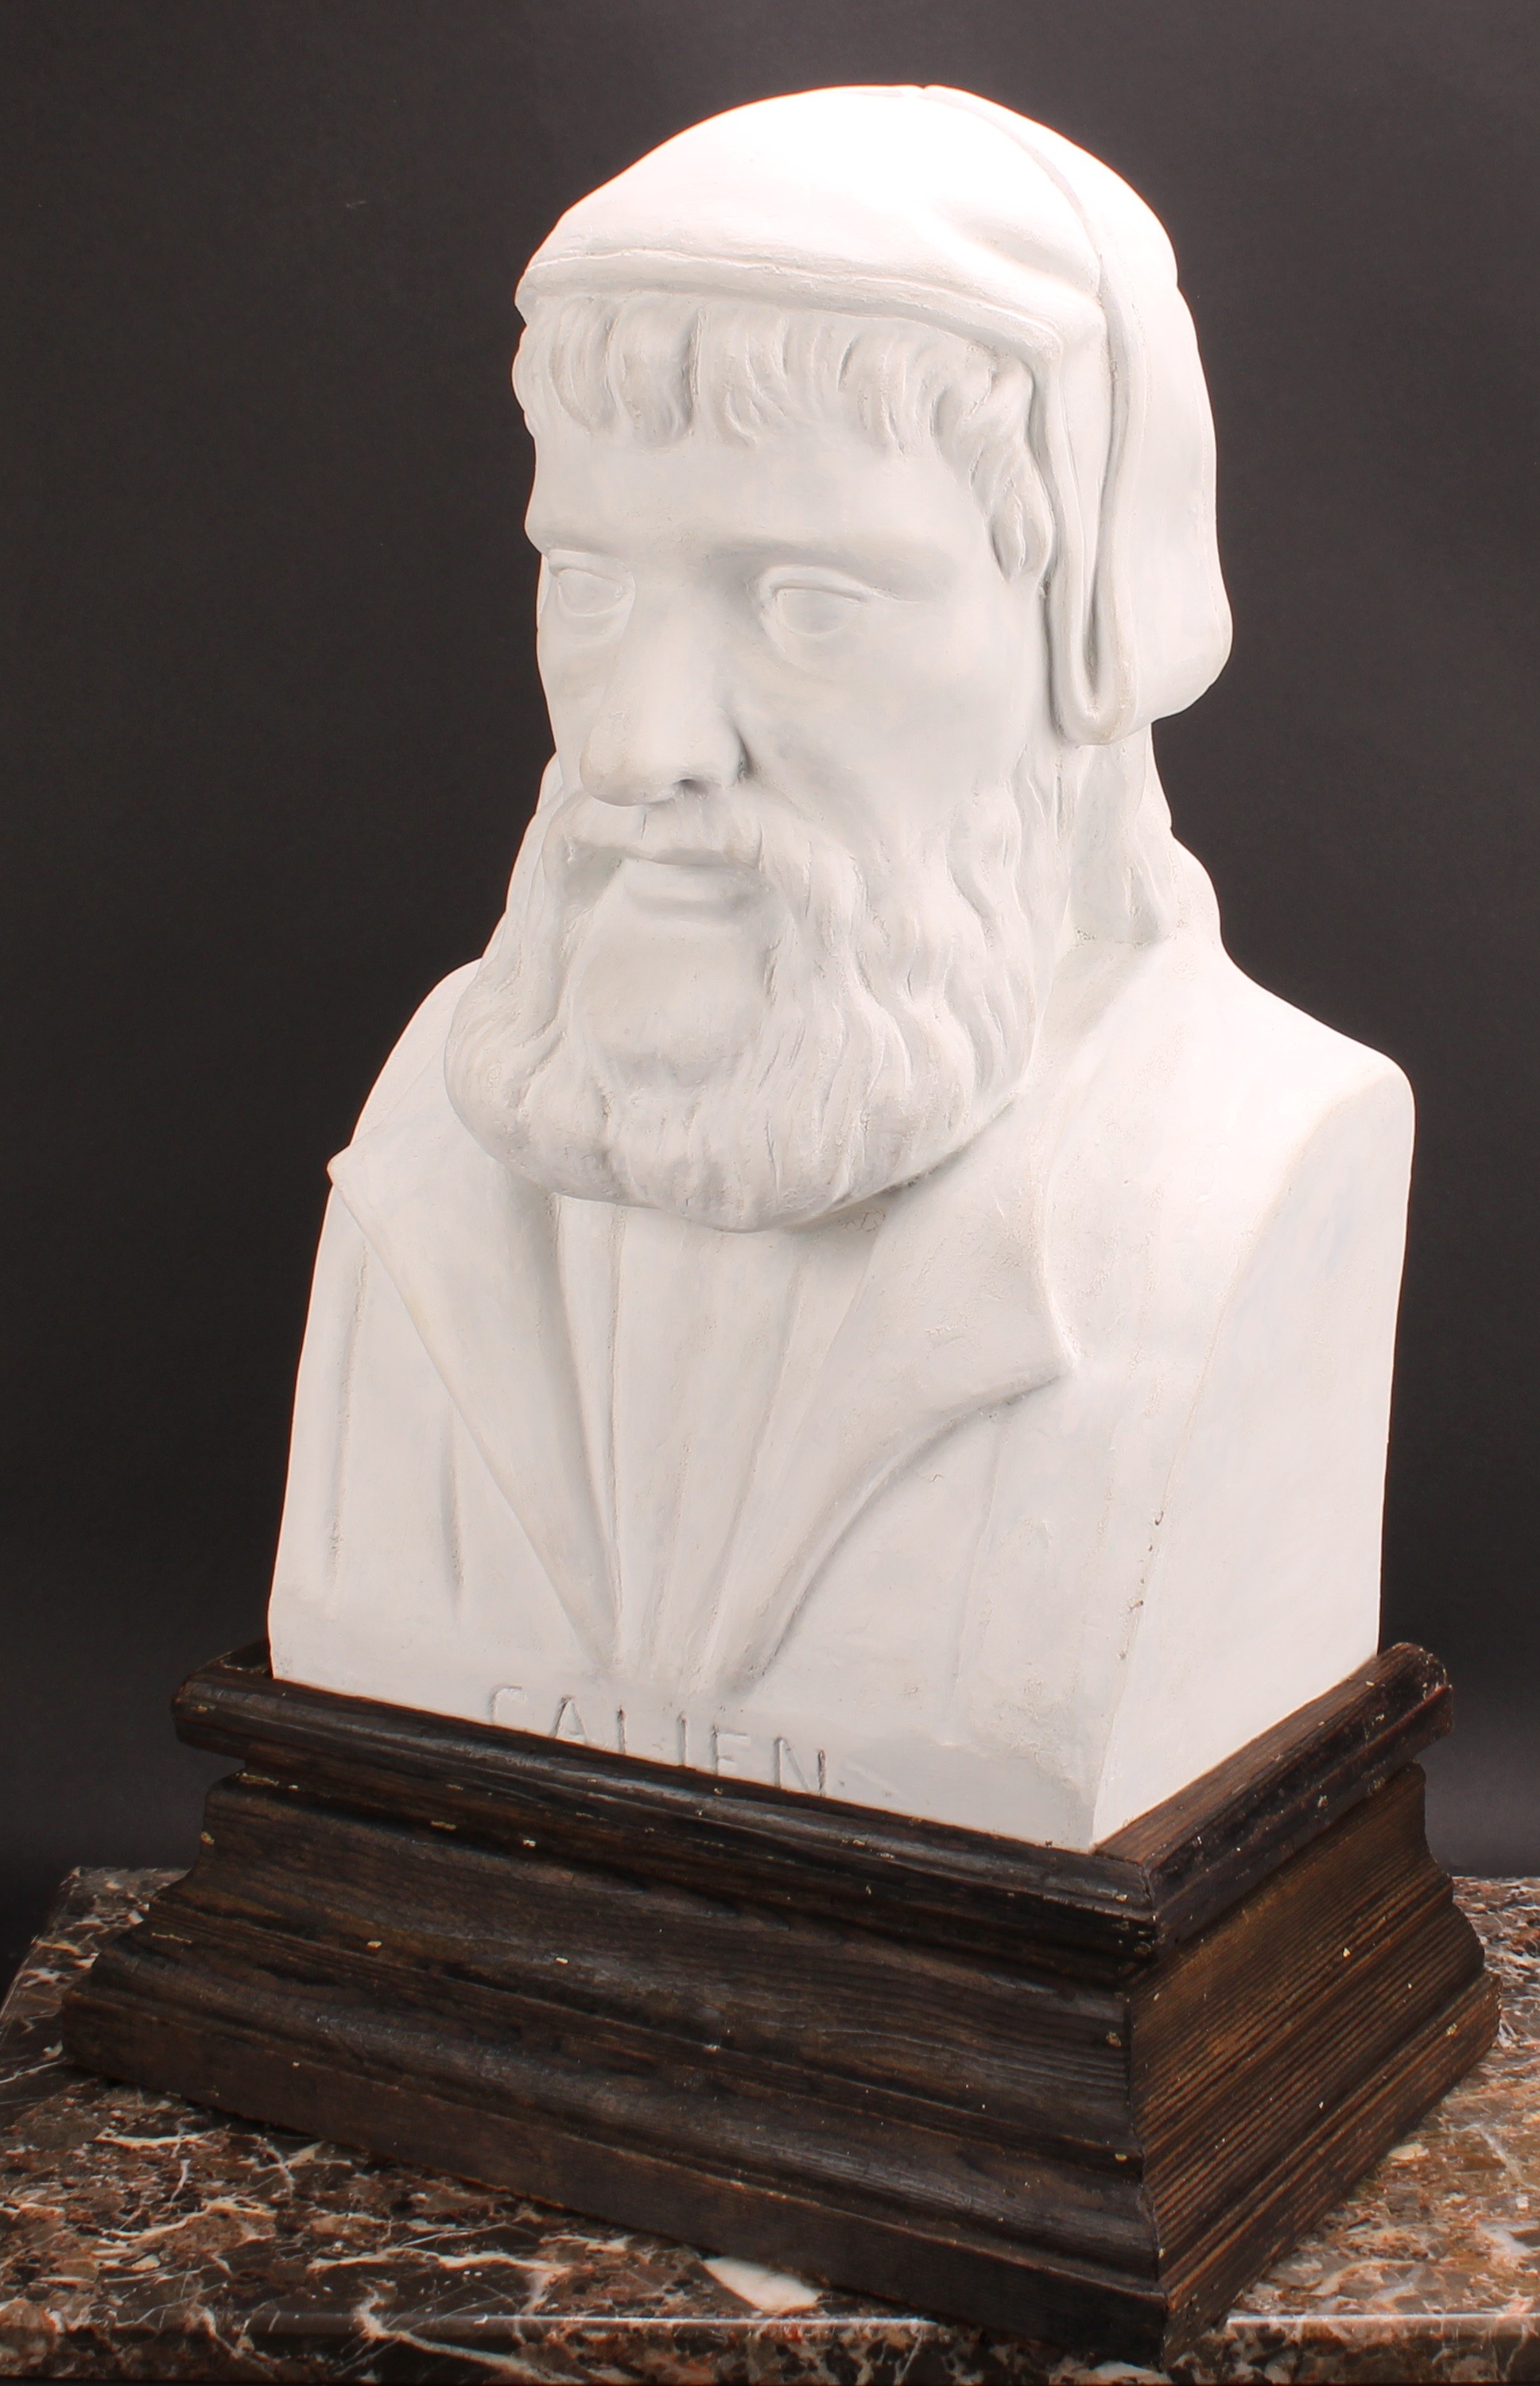 An early 20th century plaster portrait bust, Galen (129 - 216CE), Greek physician, medical - Image 3 of 4